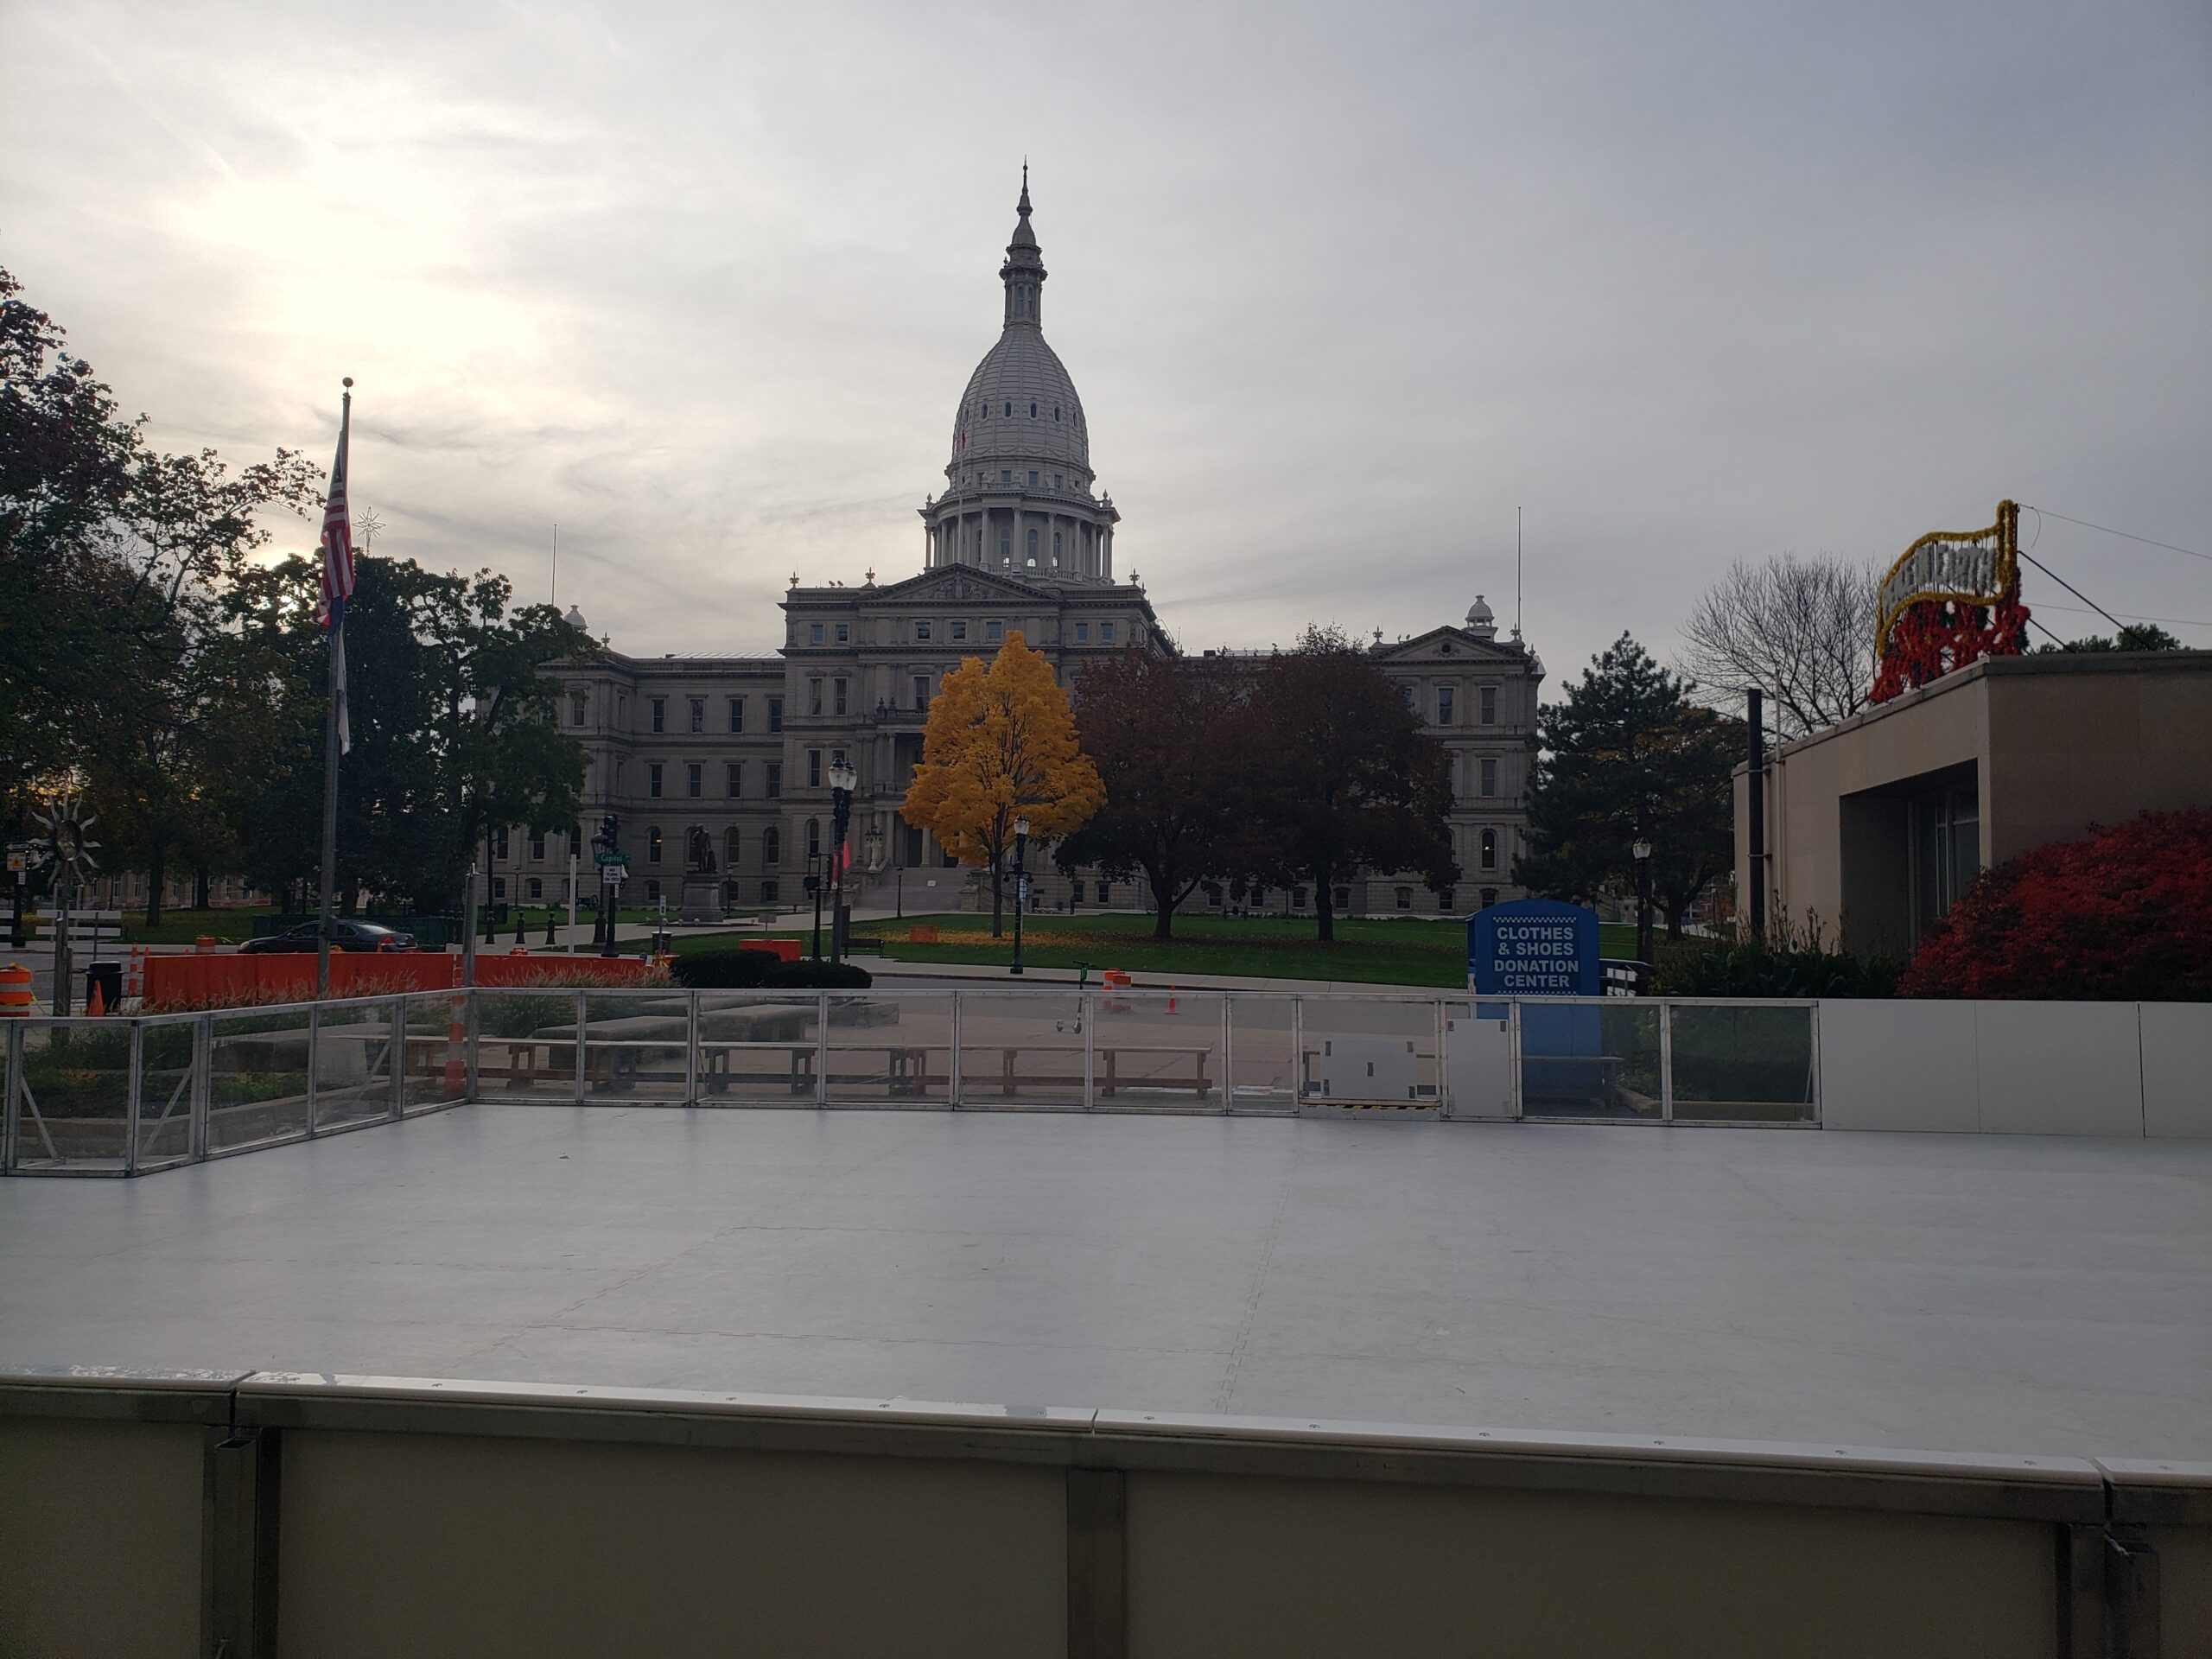 The downtown Lansing ice rink re-opened on Nov. 5. The rink will be open to the public daily until 10 p.m.